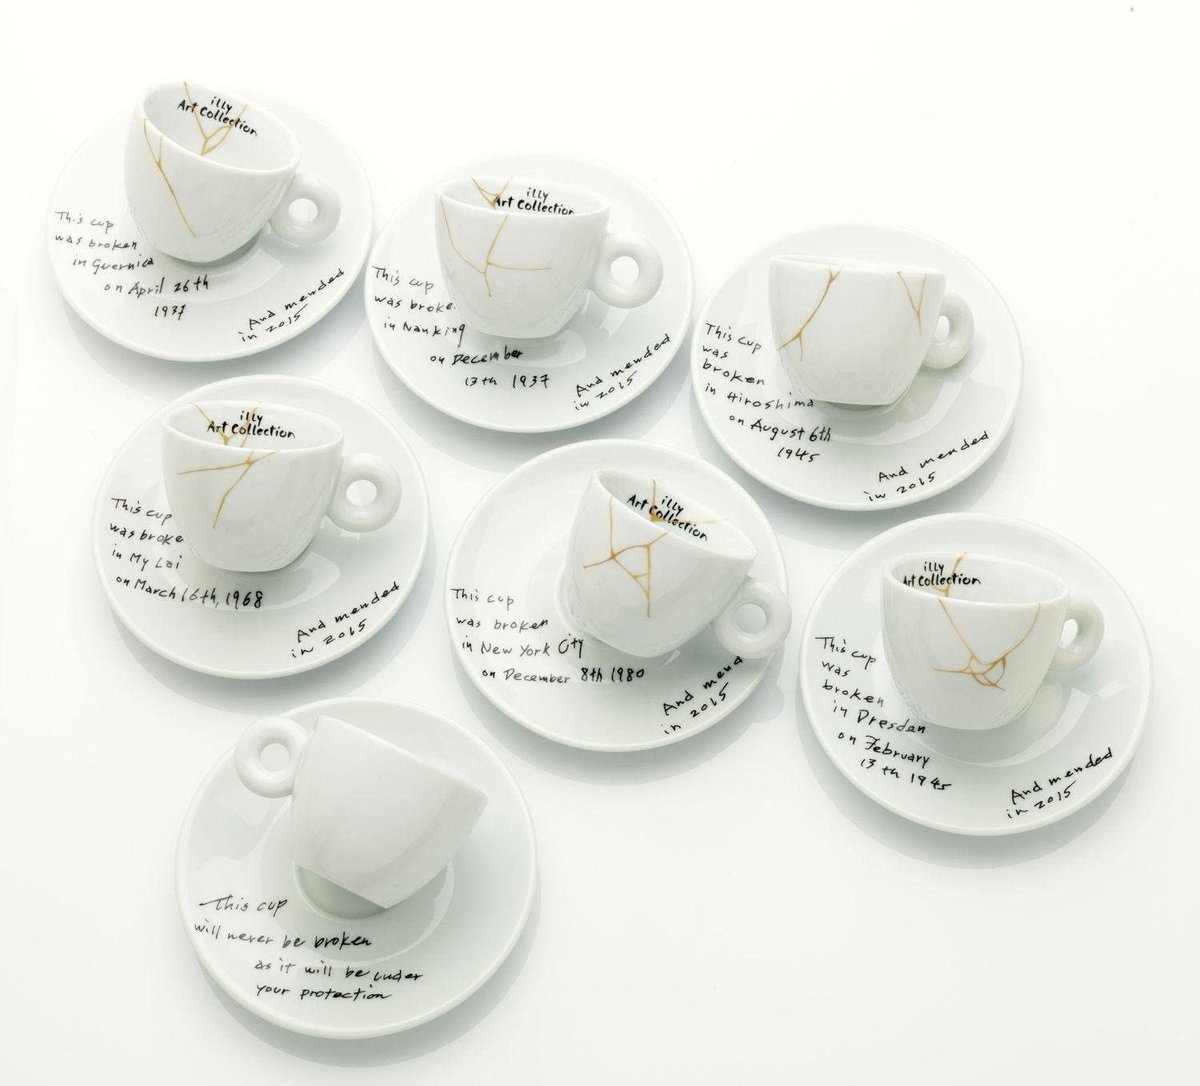 Yoko Ono - Mended Cups, 2015.
Seven espresso cups and saucers.

#illyartcollection @IllyCafe @illyUSA #kintsugi